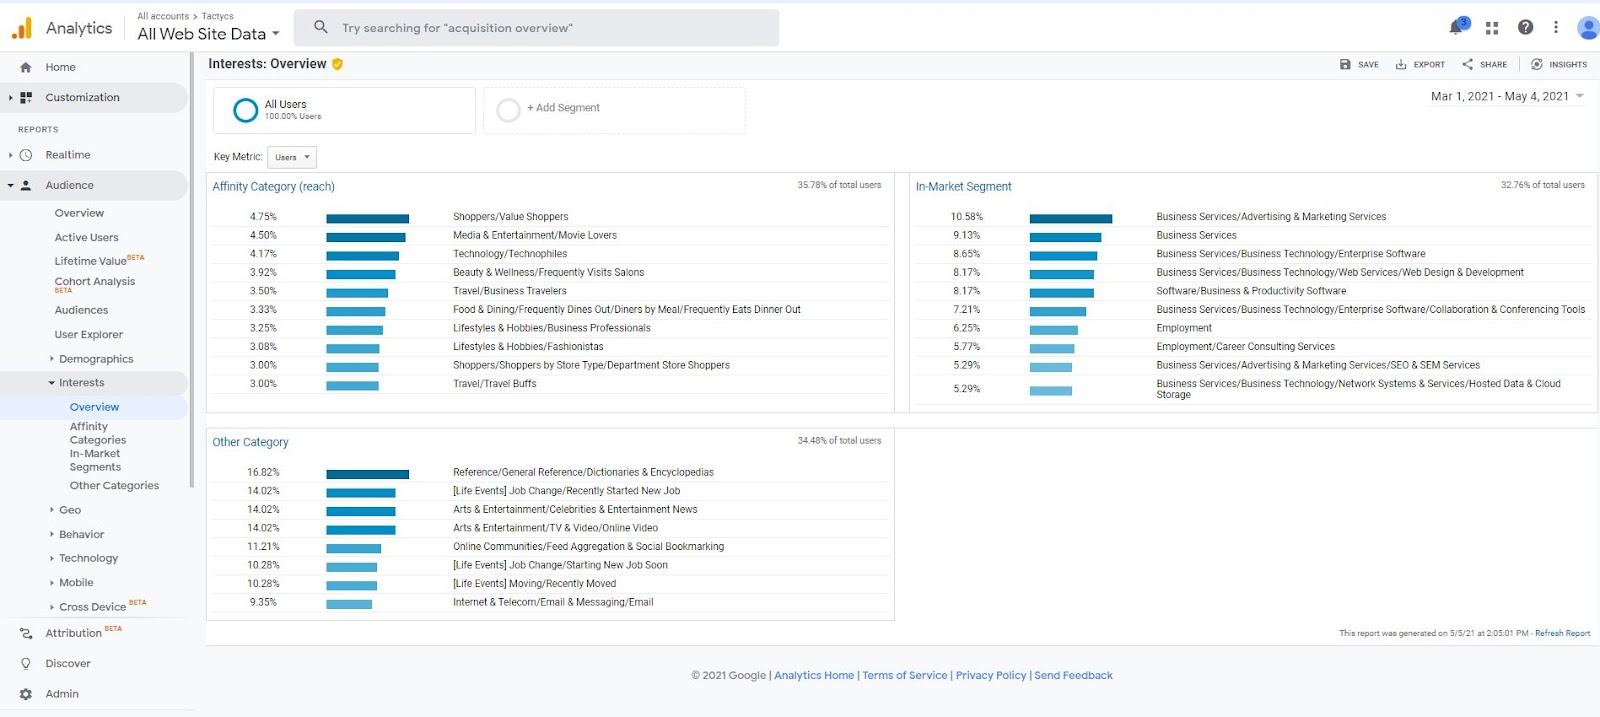 Google Analytics provides an interest report to analyze your target demographics' lifestyles.